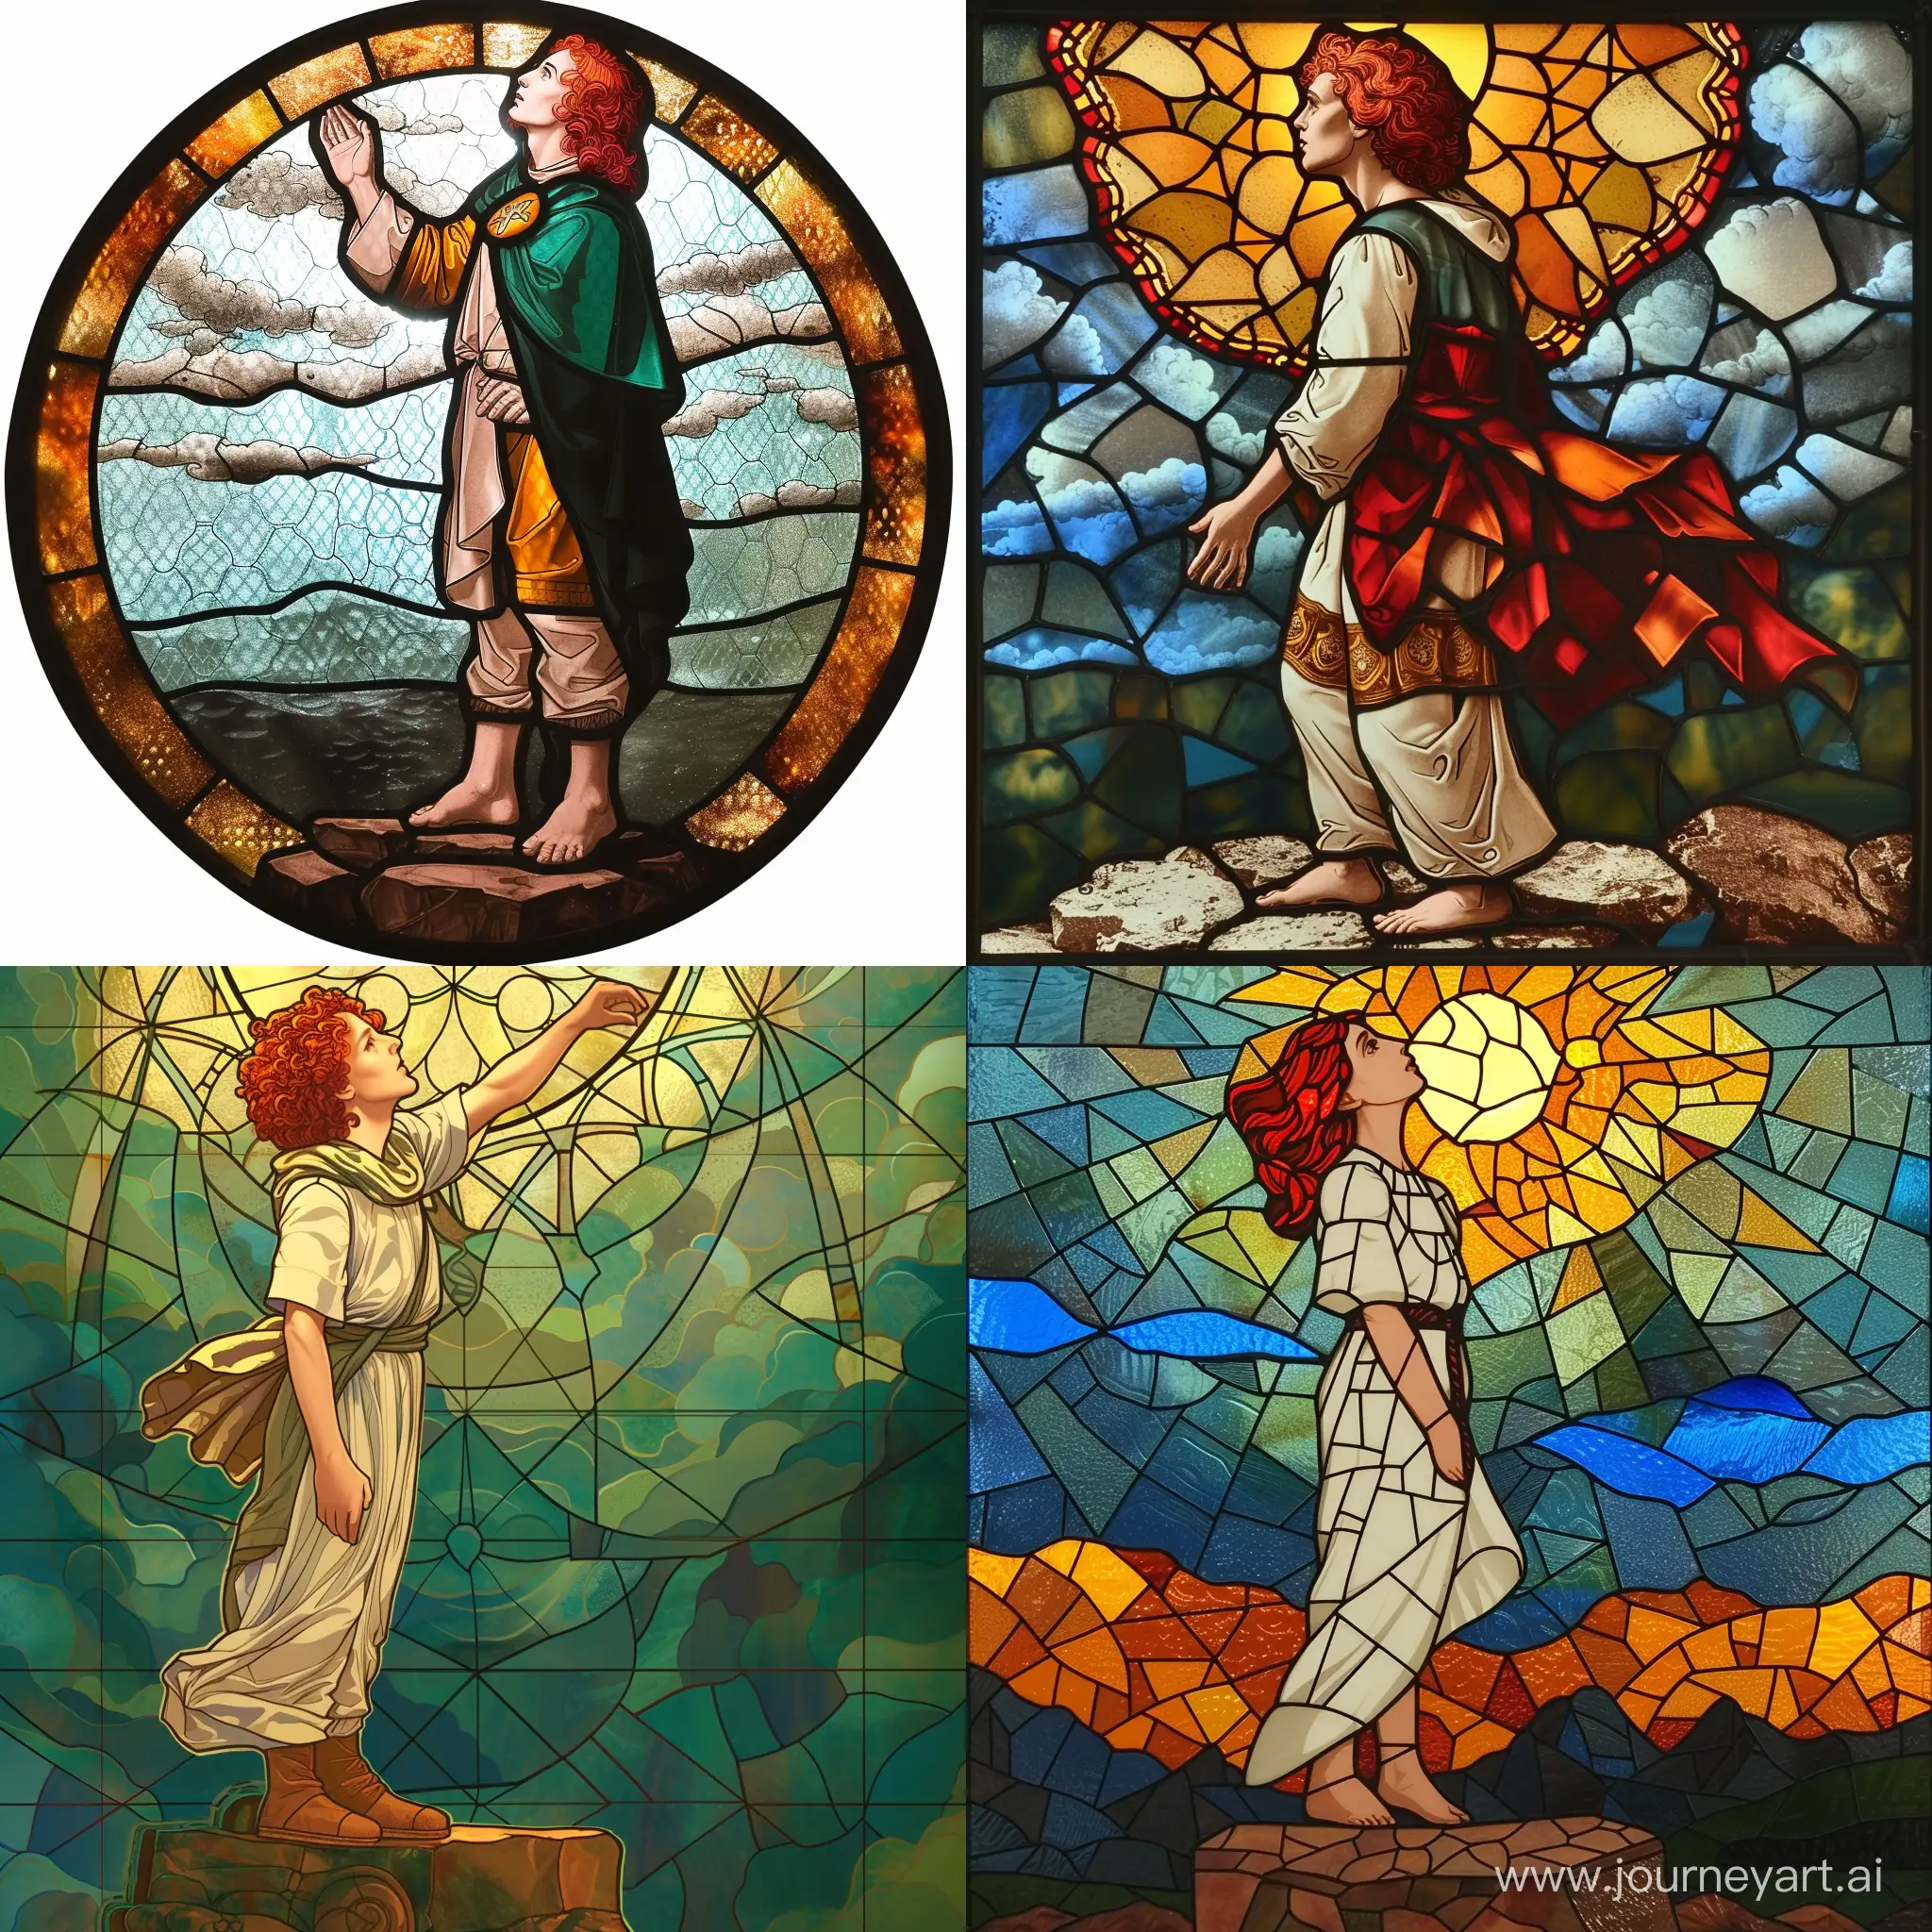 an icon of a Christian saint with red hair, standing on a stone and looking at the sky, stained glass in the Catholic style, glass